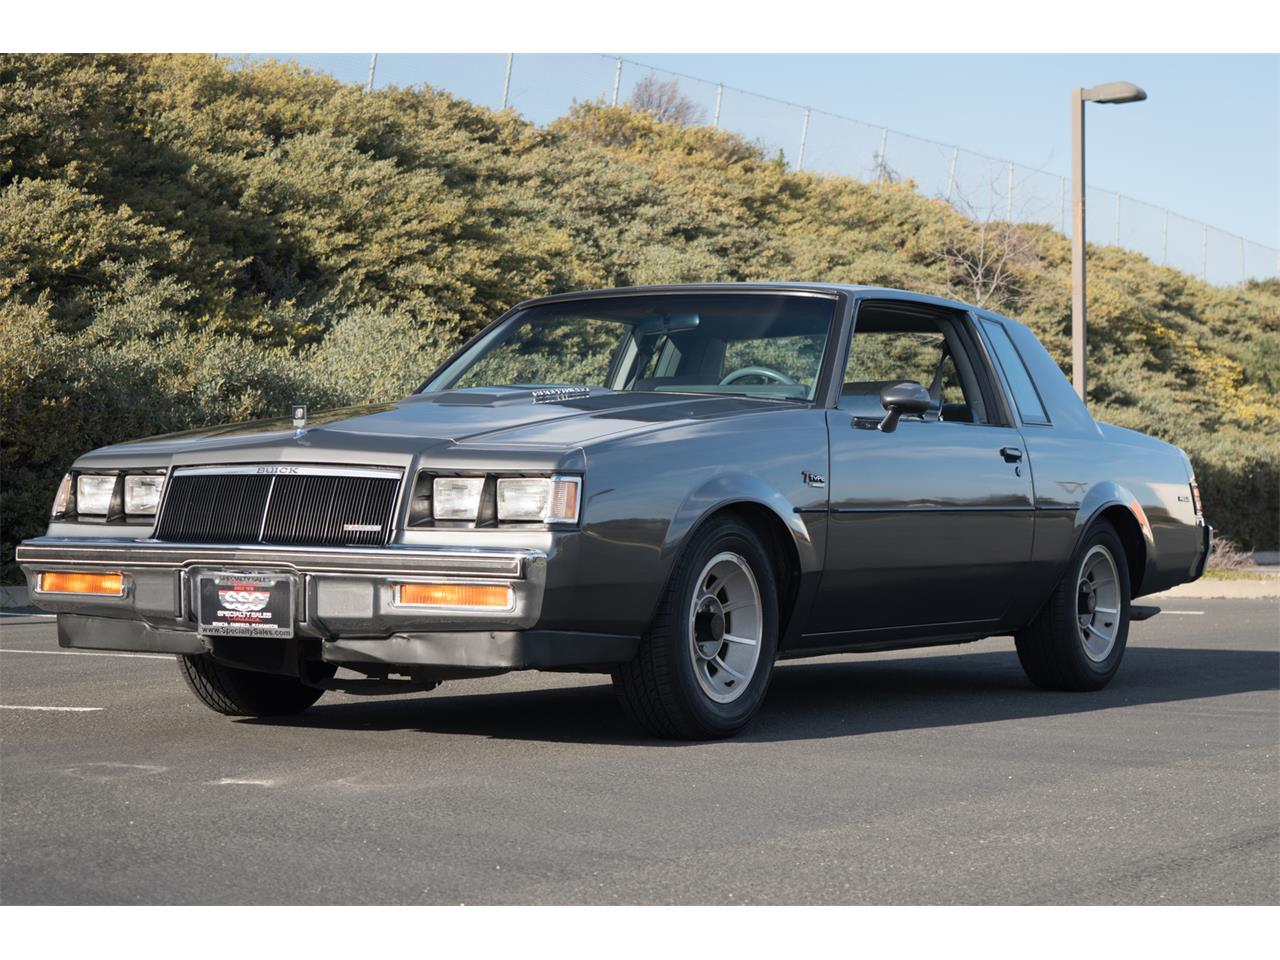 1986 Buick Regal For Sale In Fairfield Ca Classiccarsbay Com